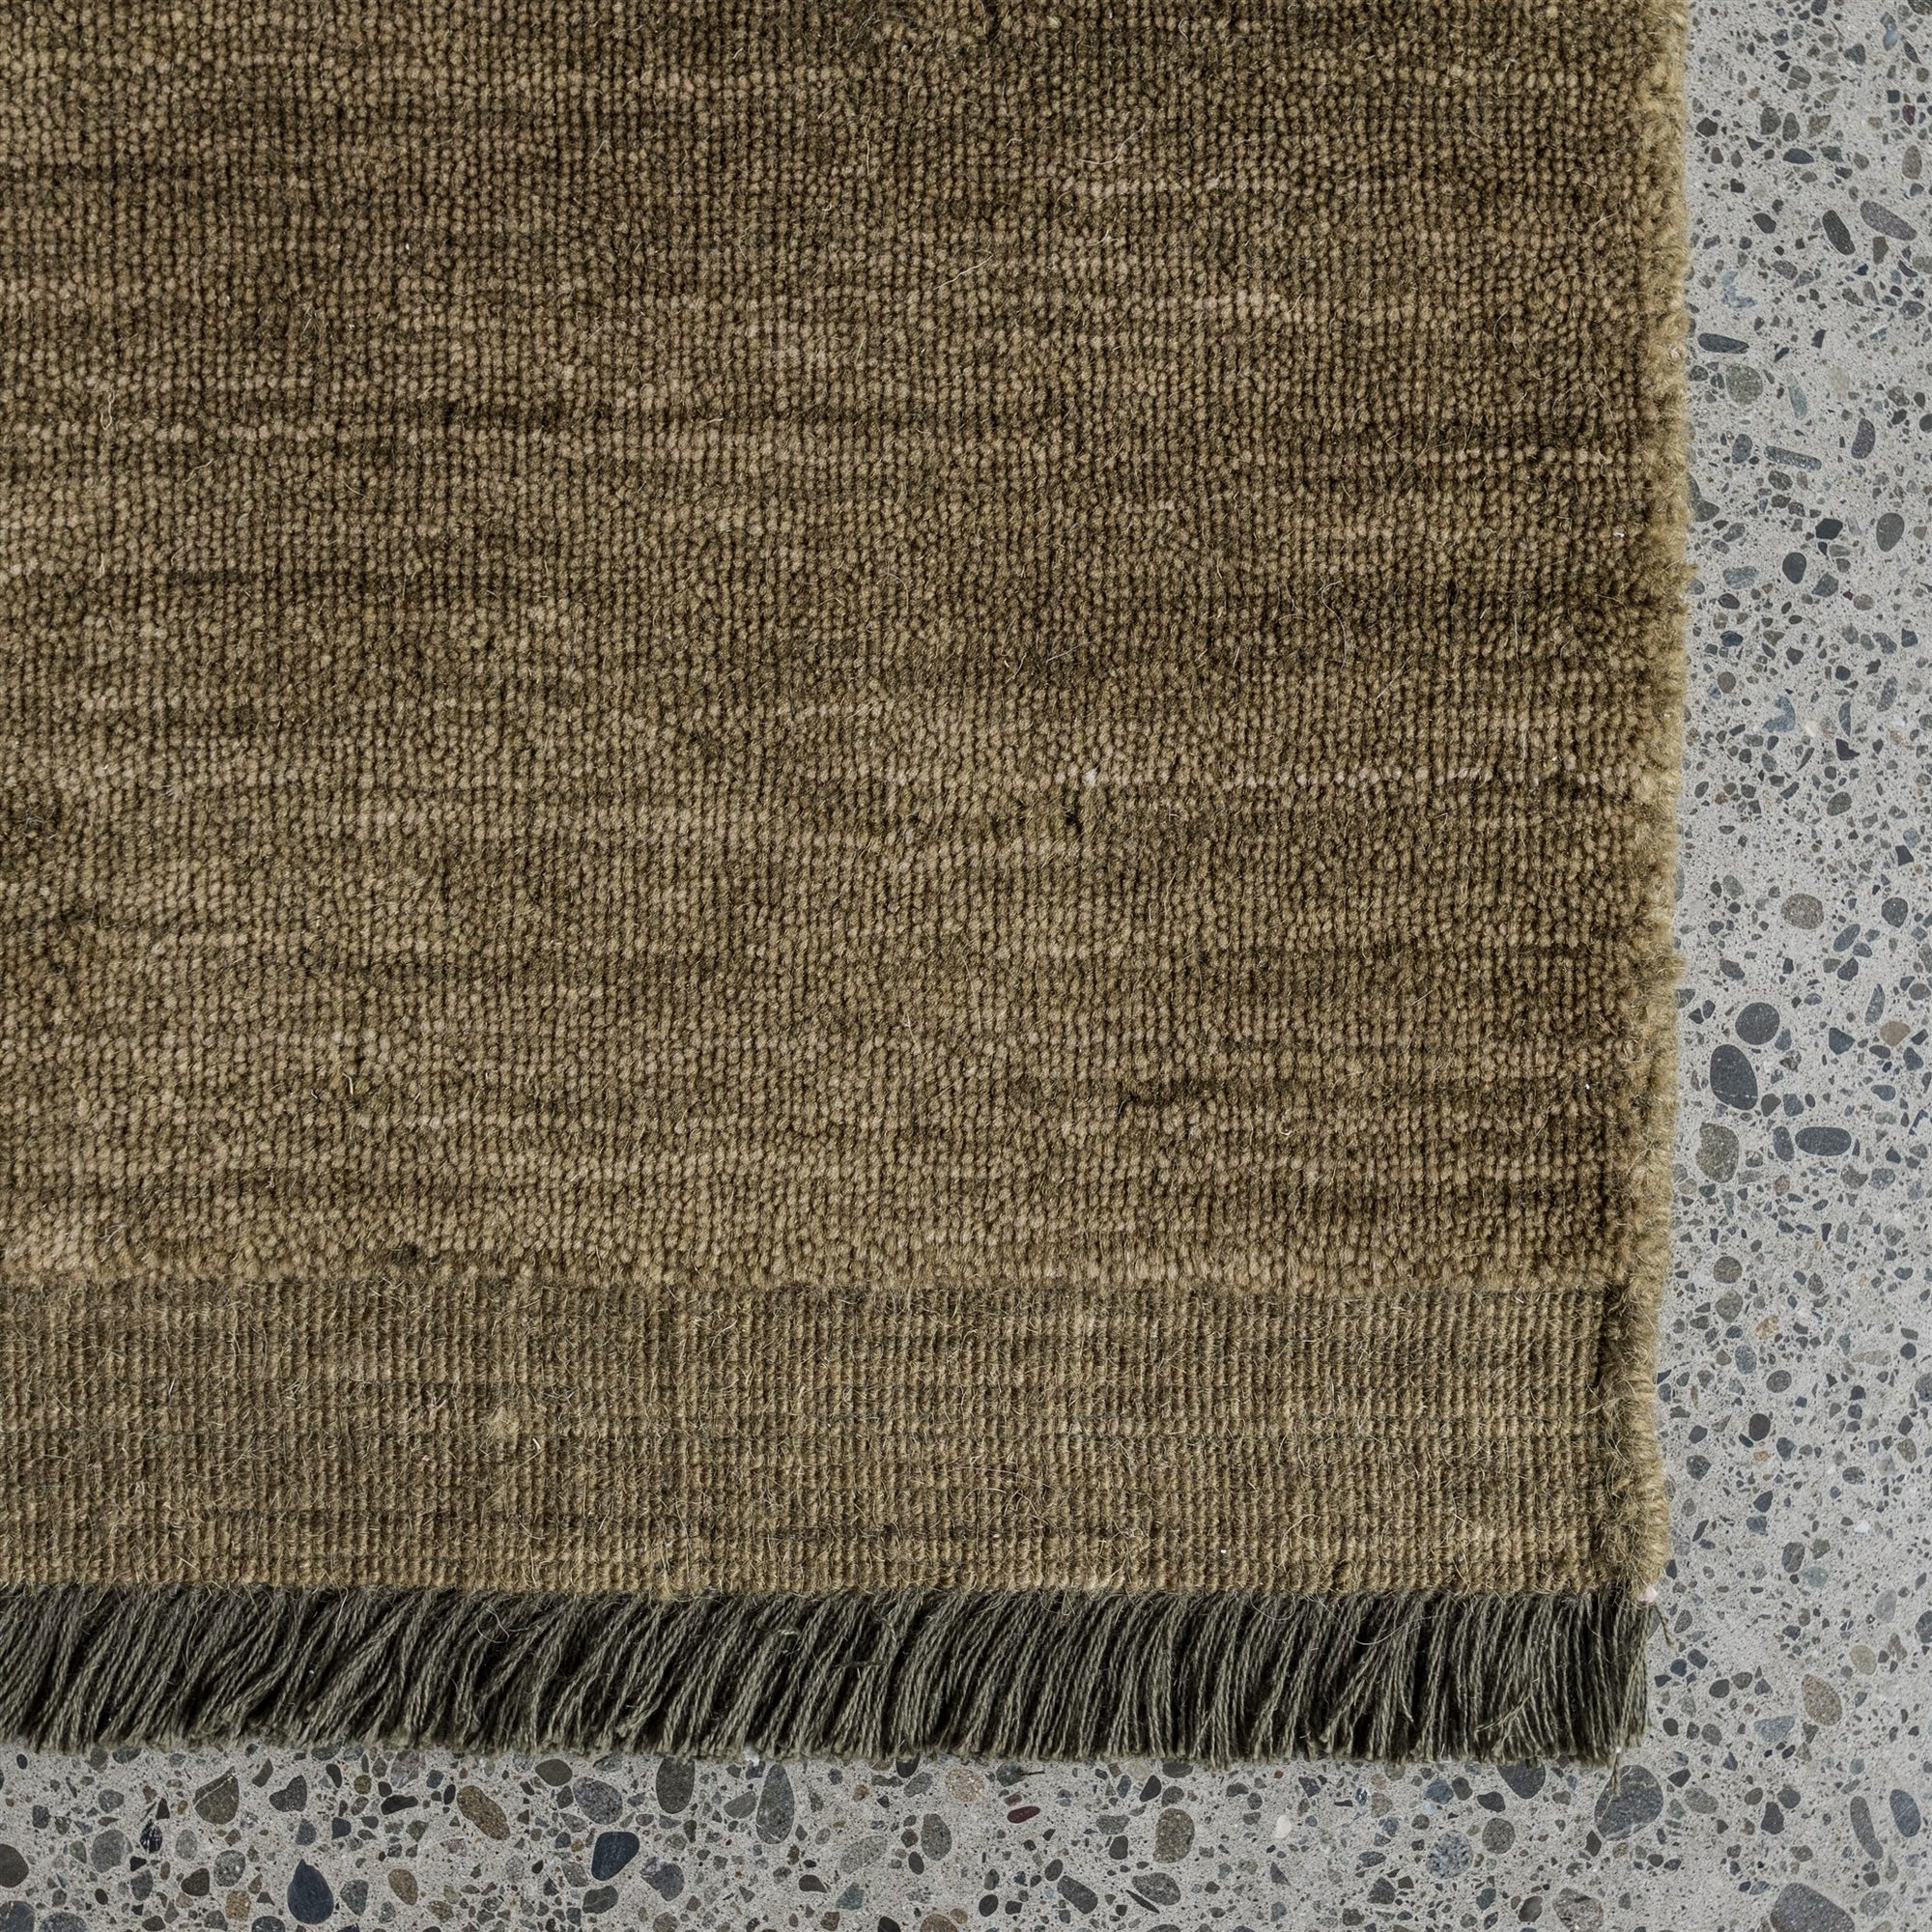 moss green floor rug detail with fringe by corcovado